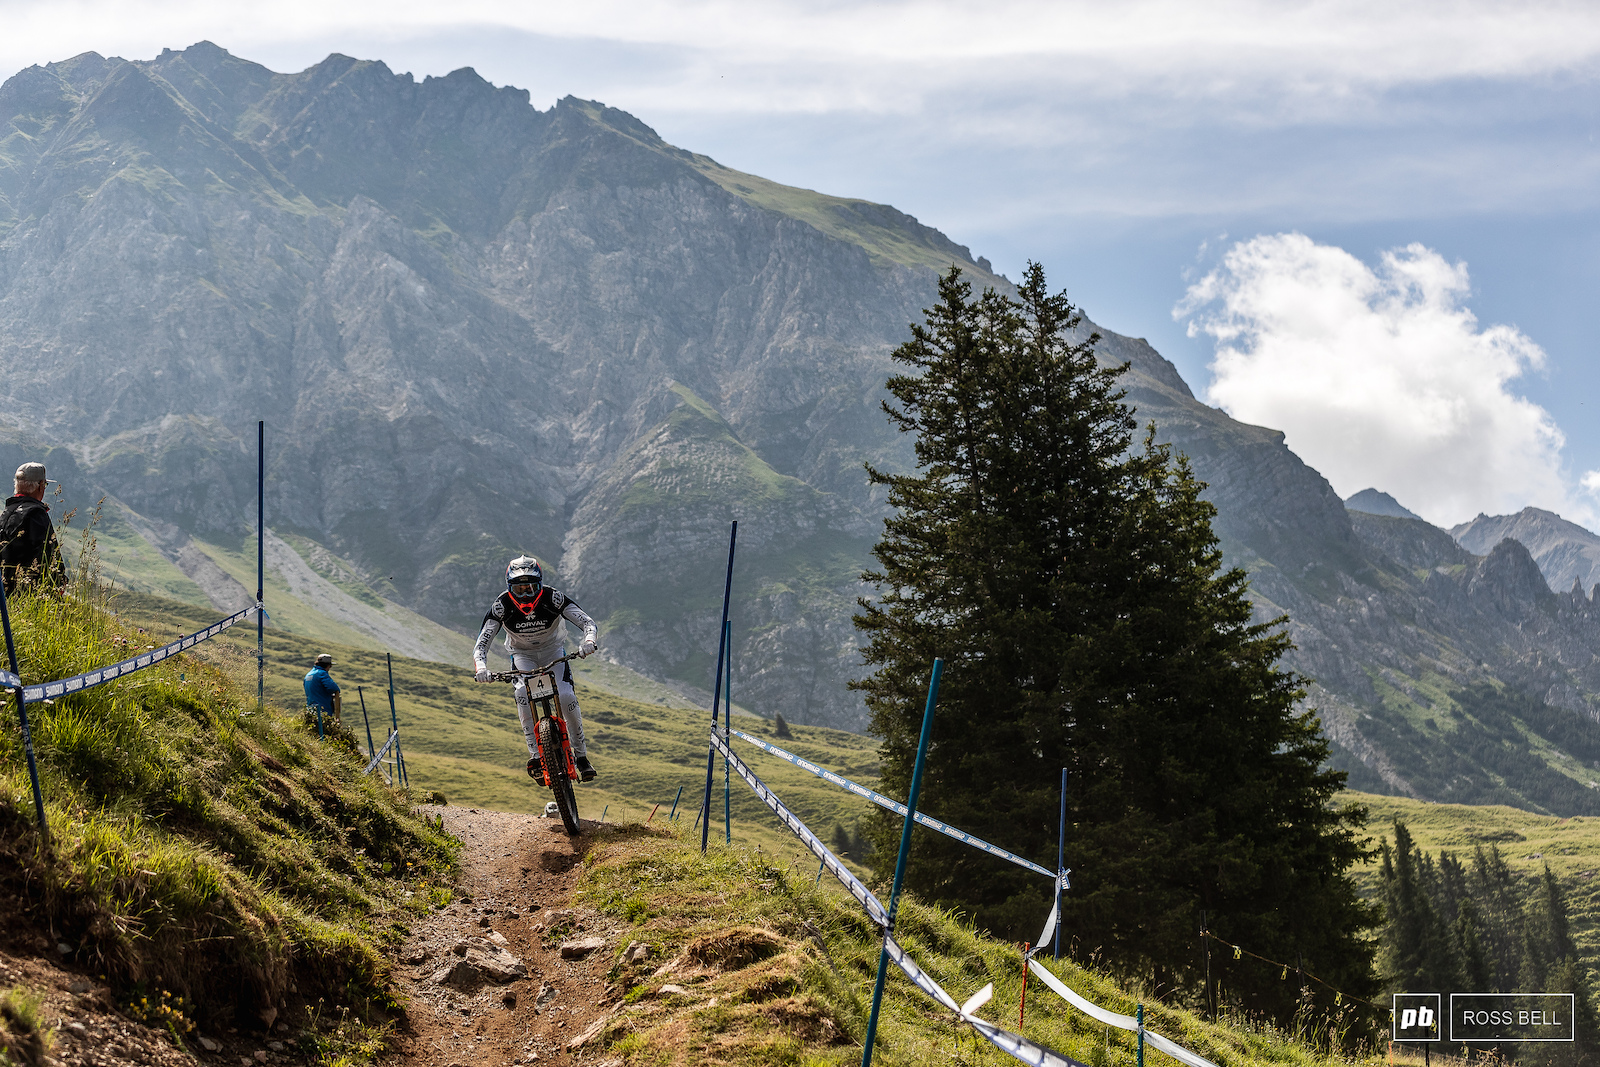 Benoit Coulanges will be looking to bounce back from his race run crash in Leogang.